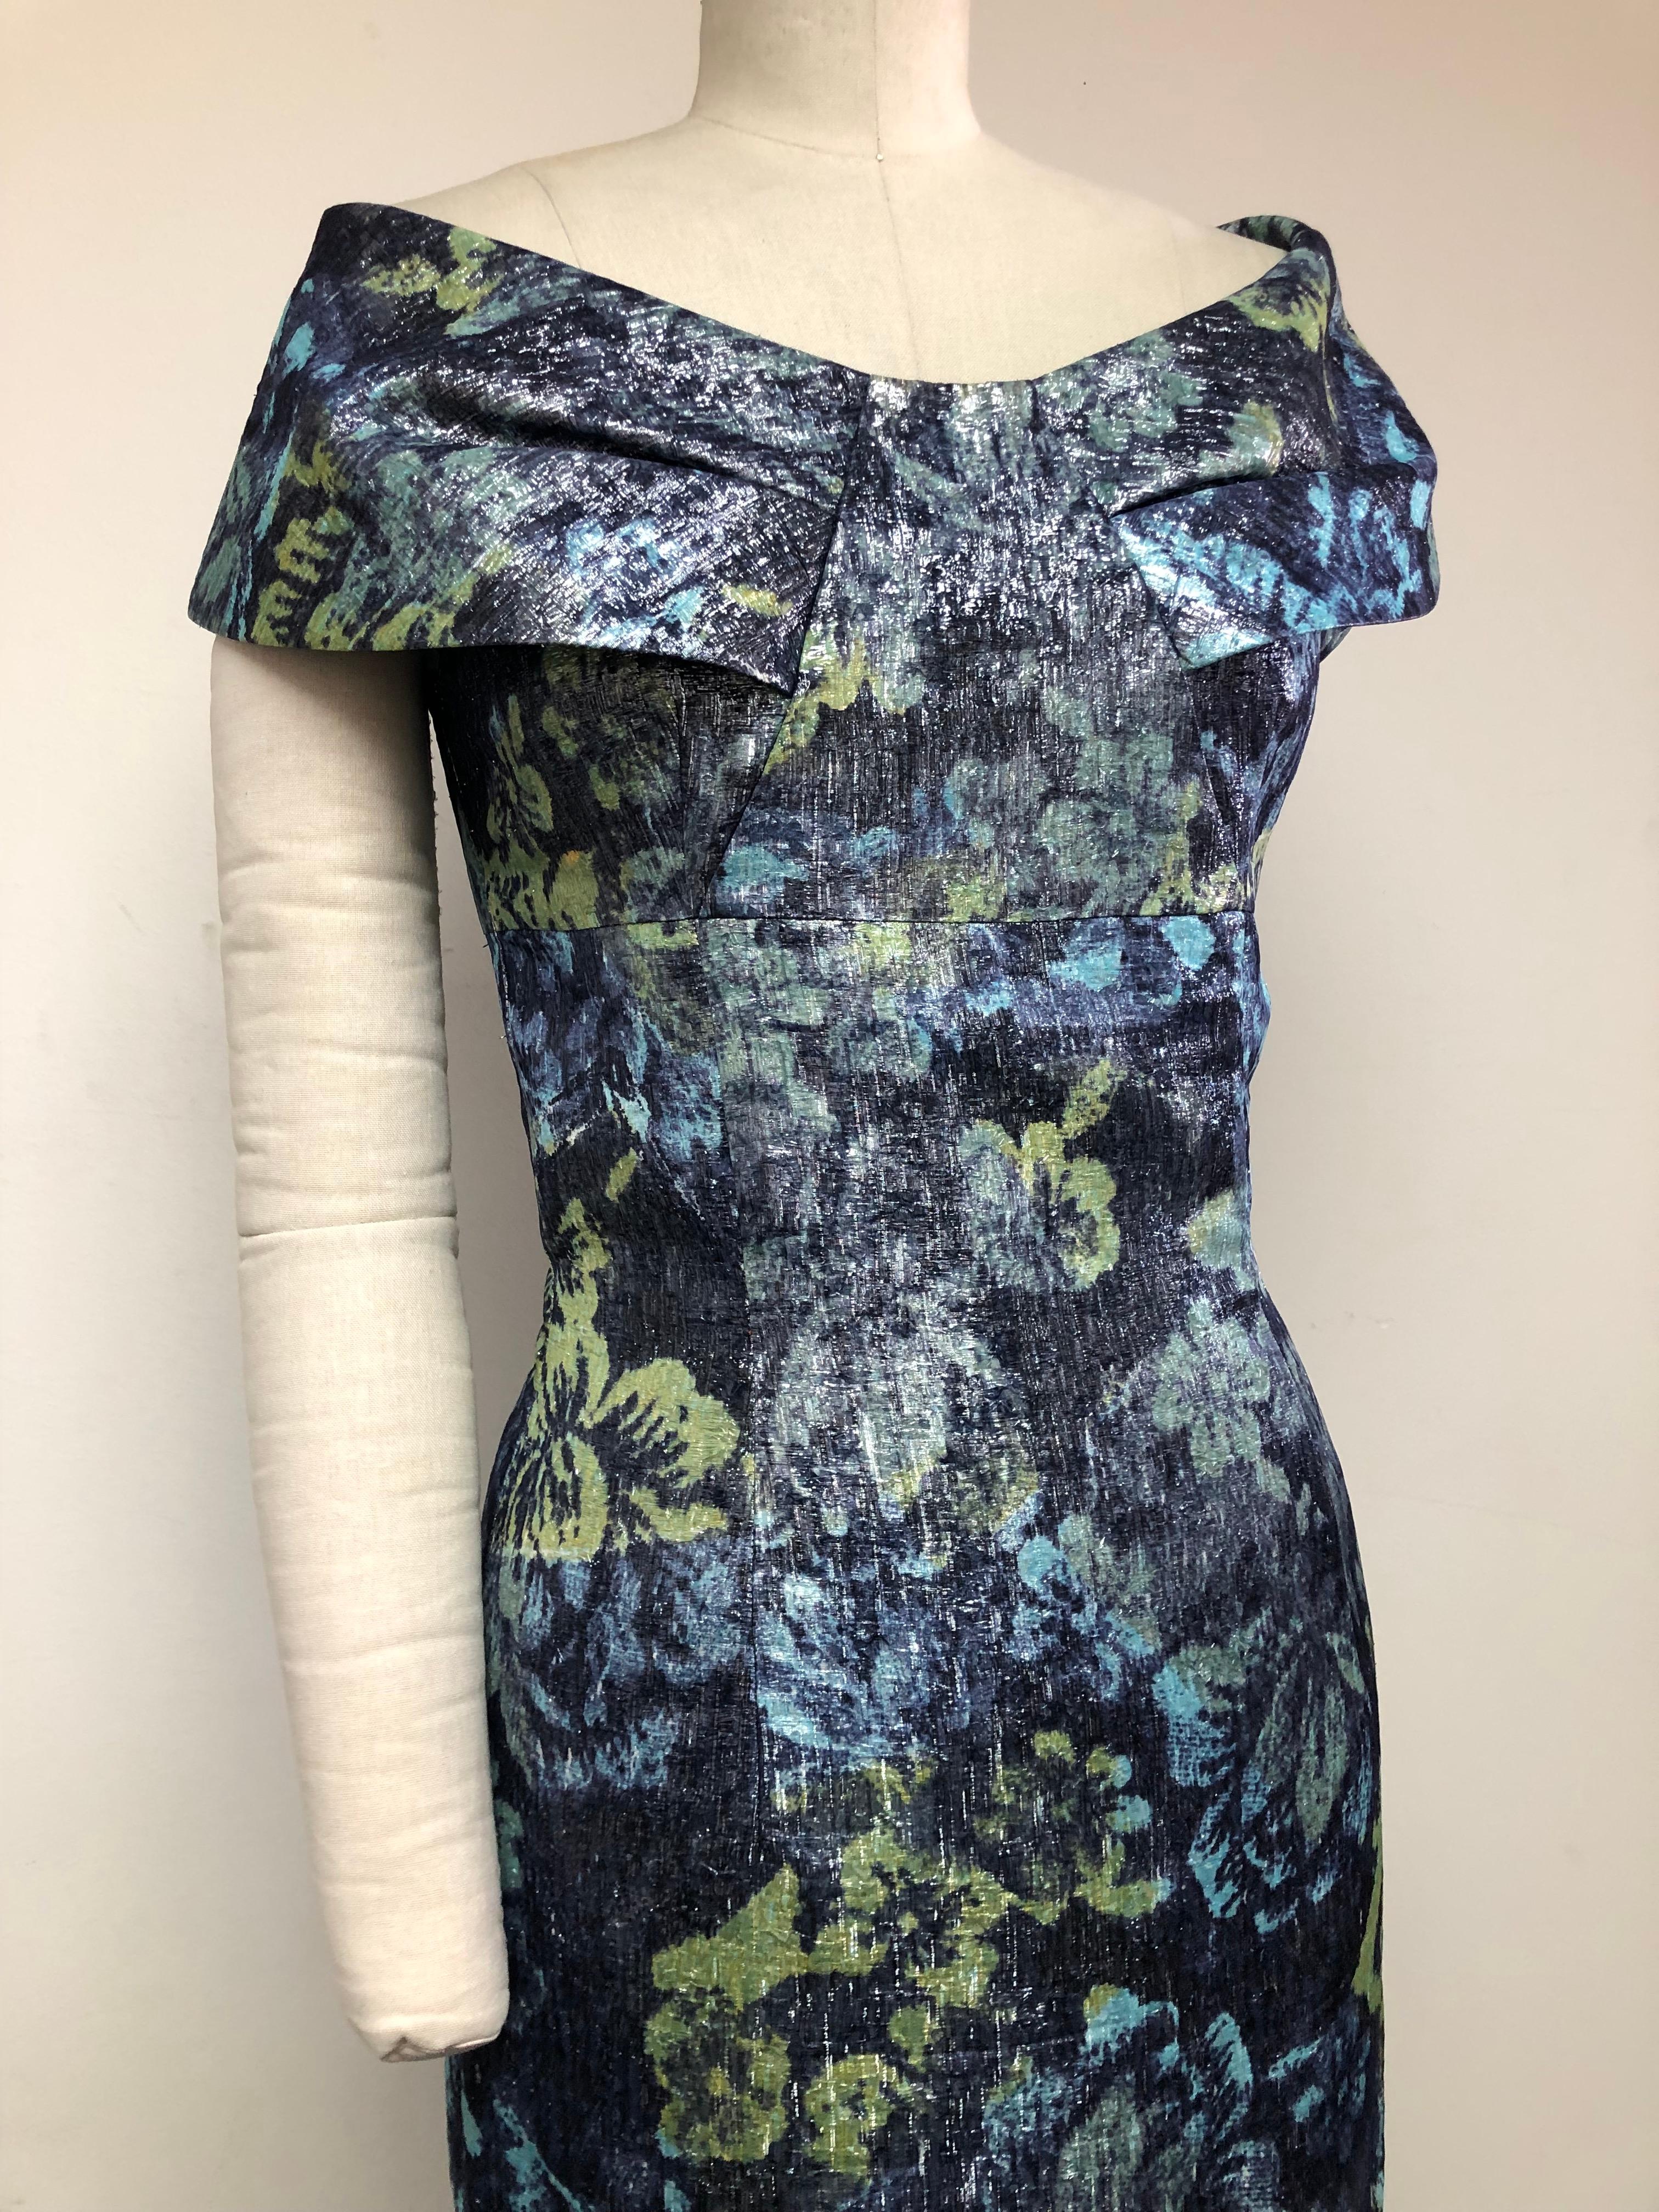 Portrait Collar Gown in French Floral Lame in Shades of Blues and Green. The glazed fabric know as 